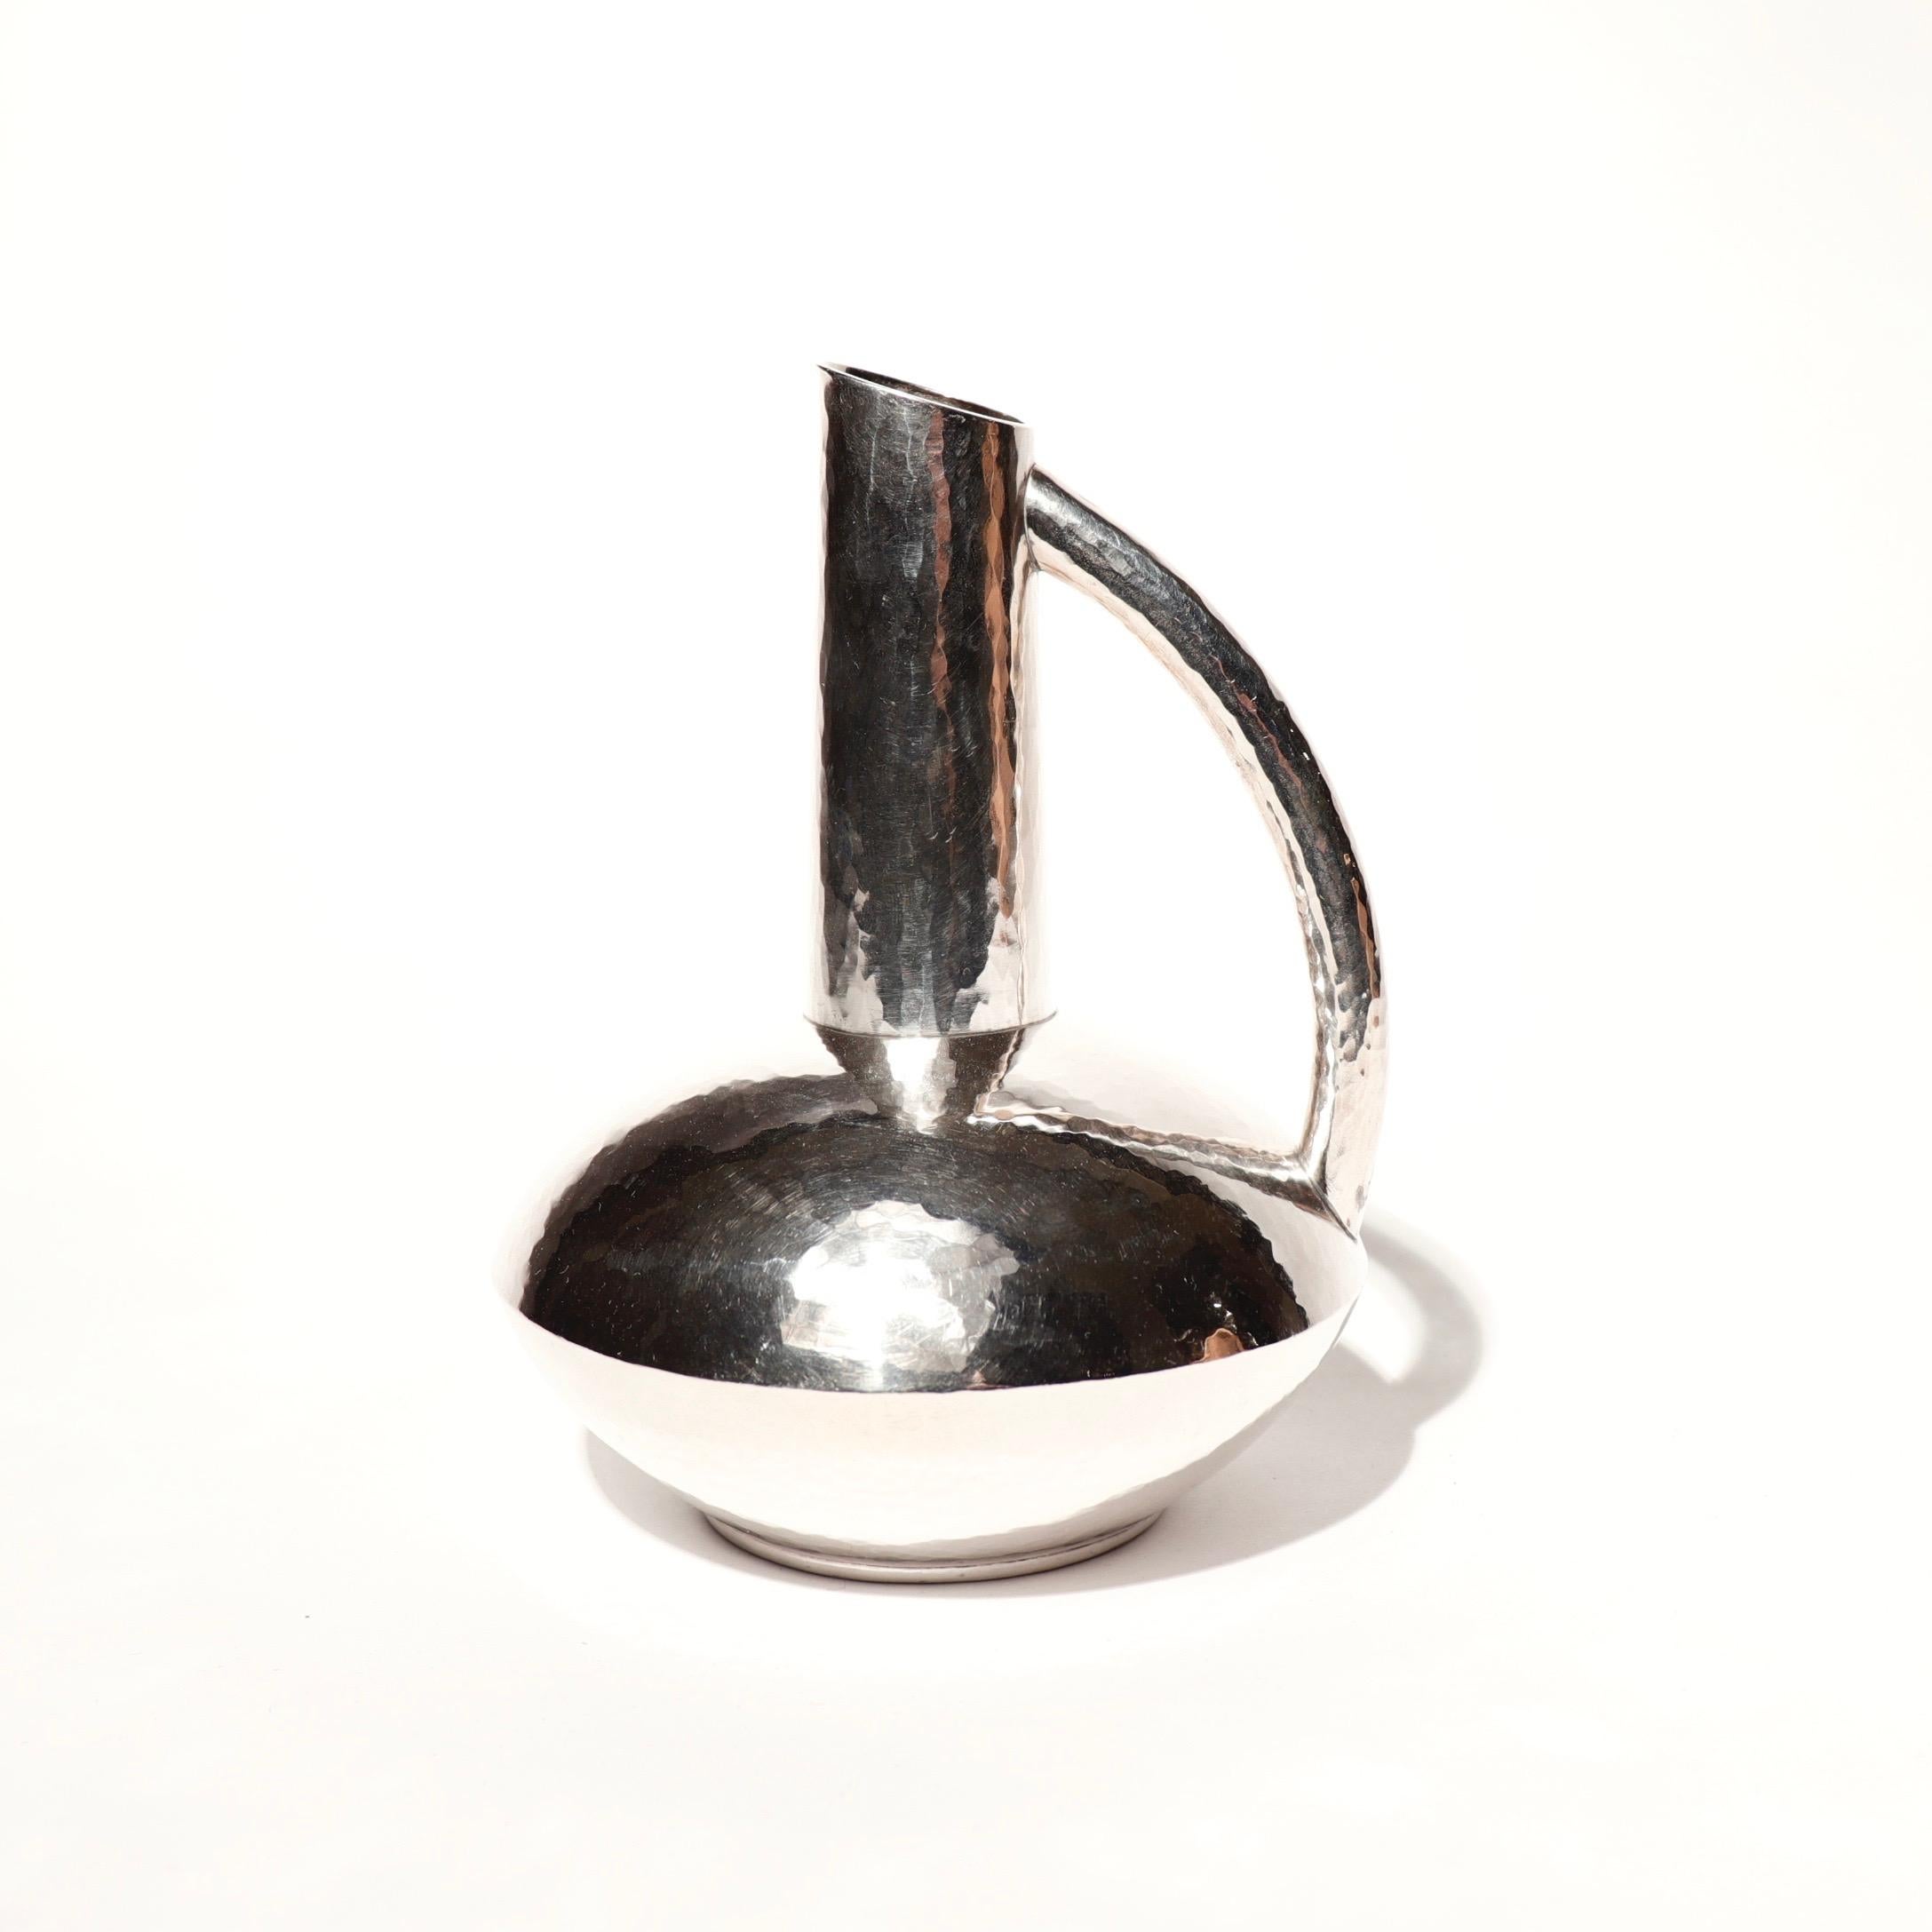 Japanese hammered silver vase by Seiho In Good Condition For Sale In Point Richmond, CA